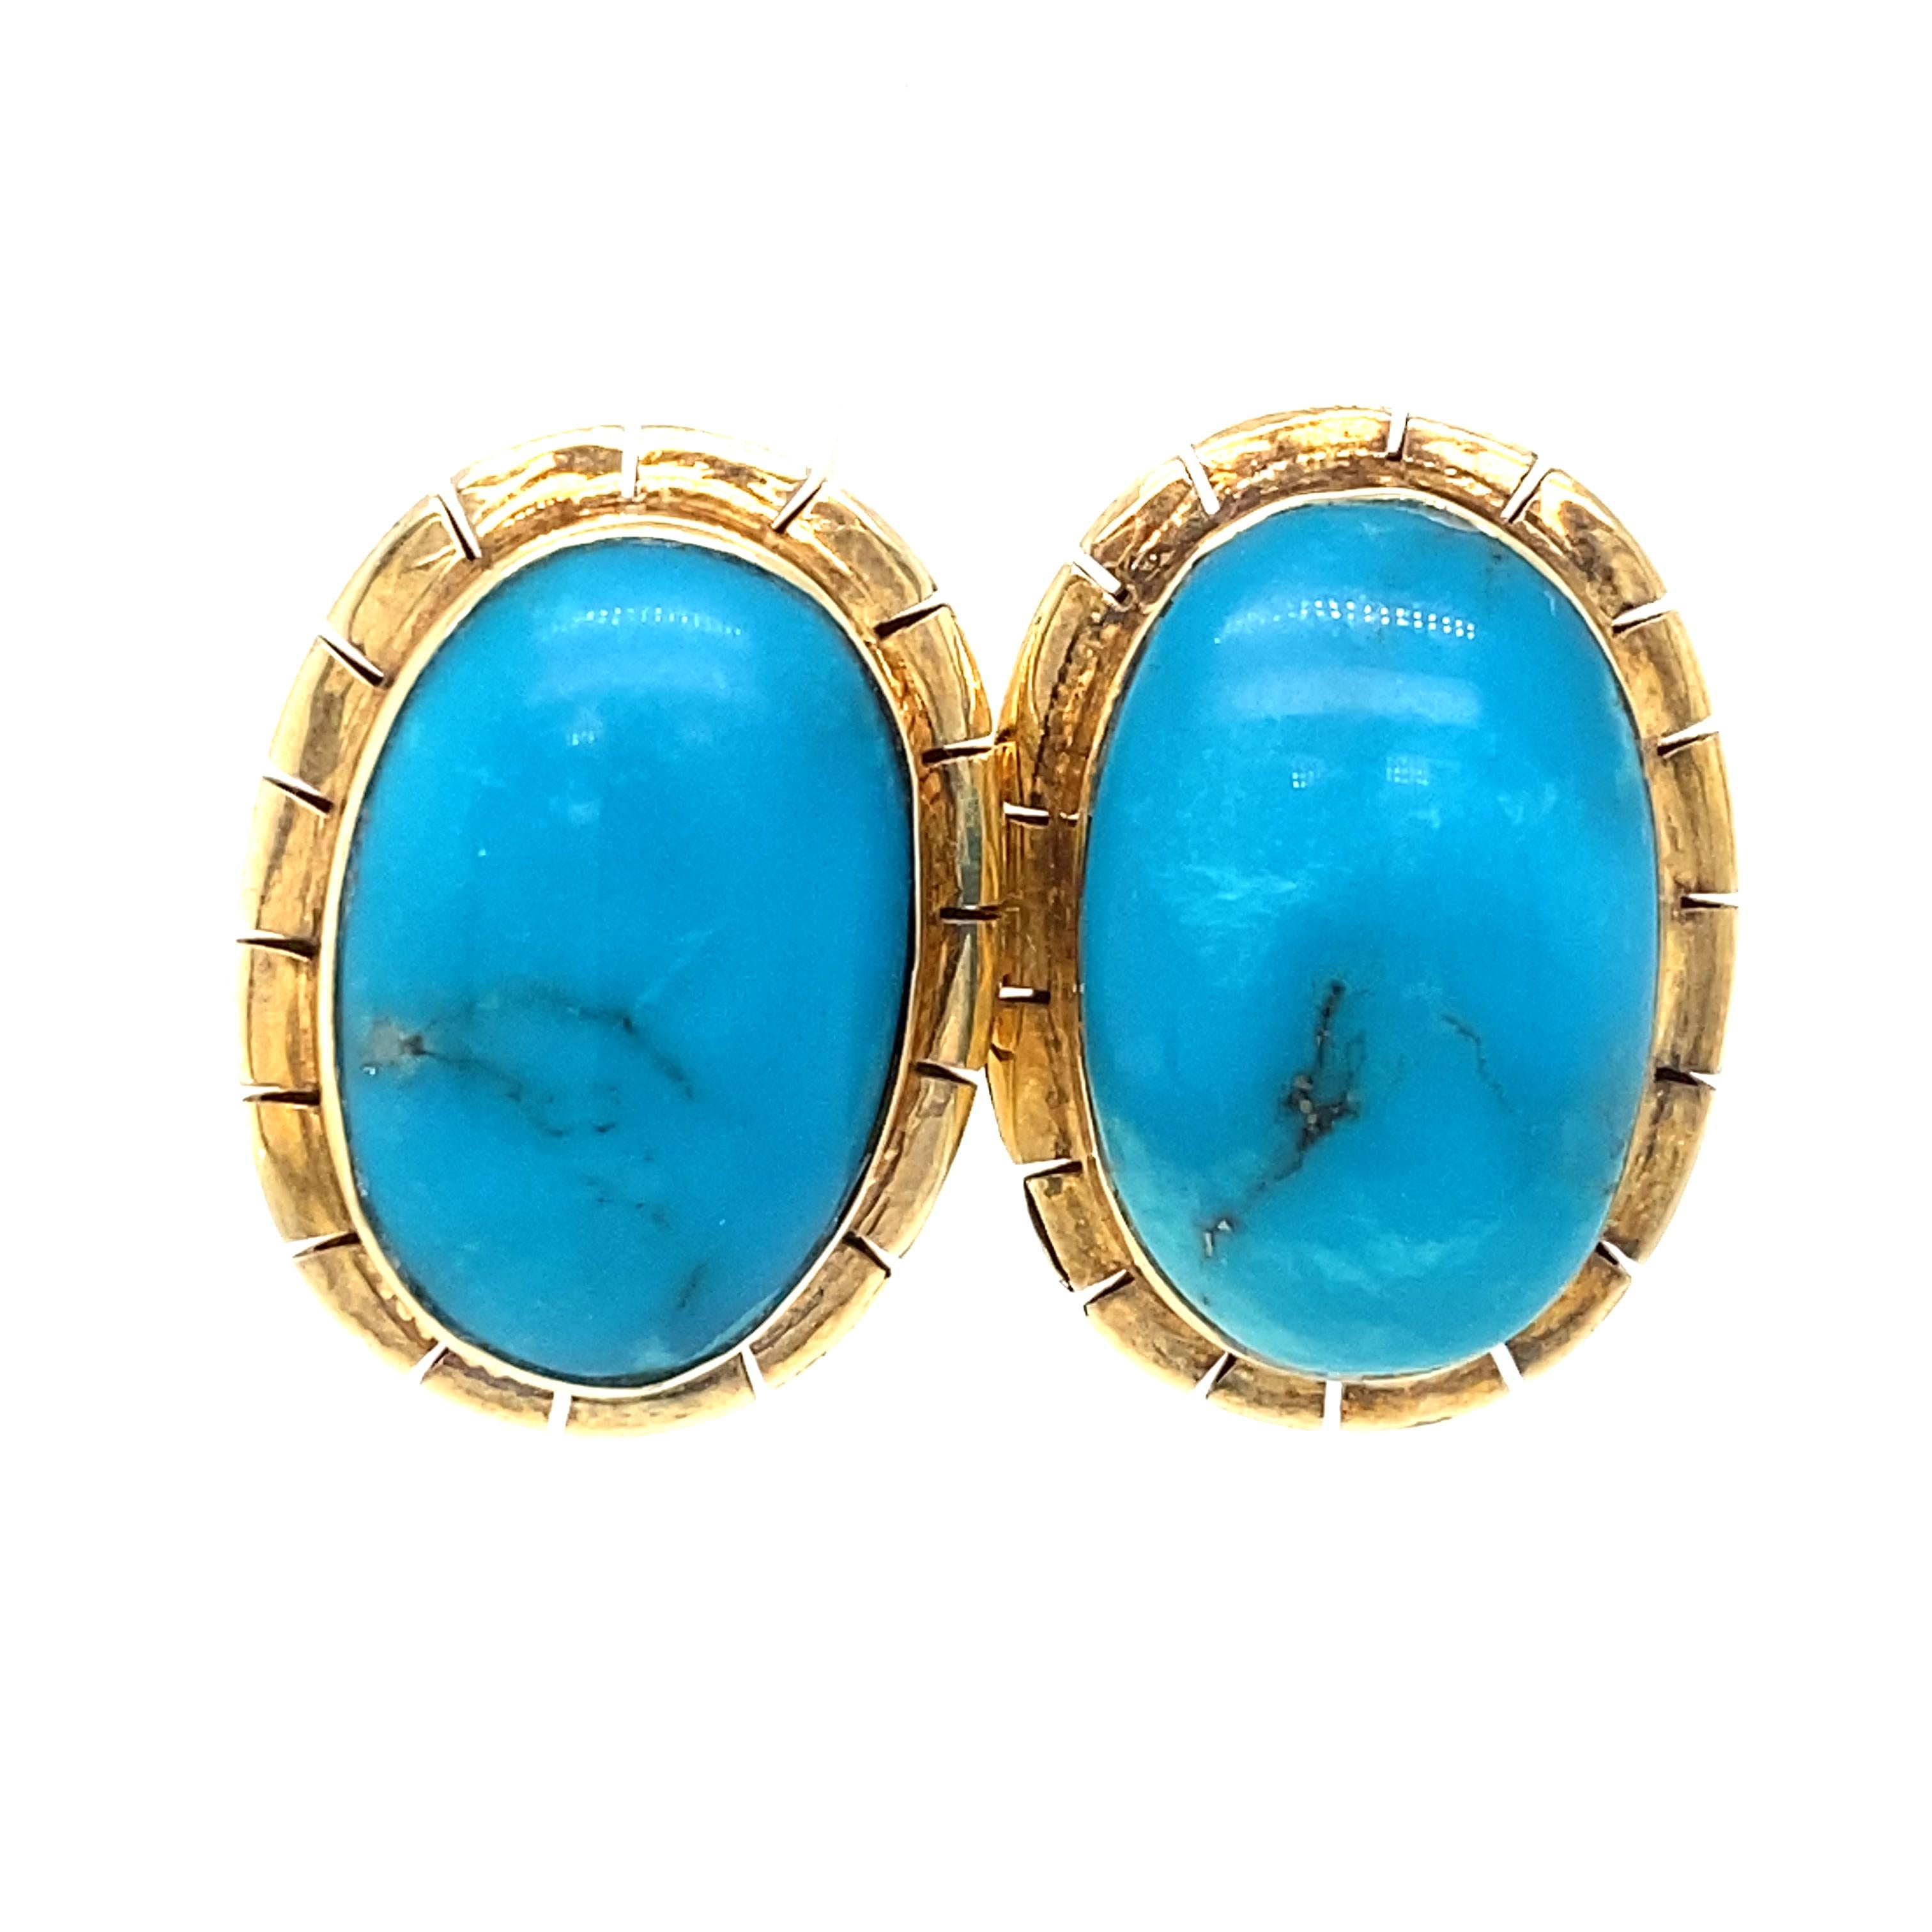 Item Details: These earrings feature vibrant blue turquoise cabochons and a geometric bezel setting. These are a great example of vintage mid-century jewelry and are perfect for a versatile wardrobe.

Circa: 1960s
Metal Type: 14 Karat Yellow